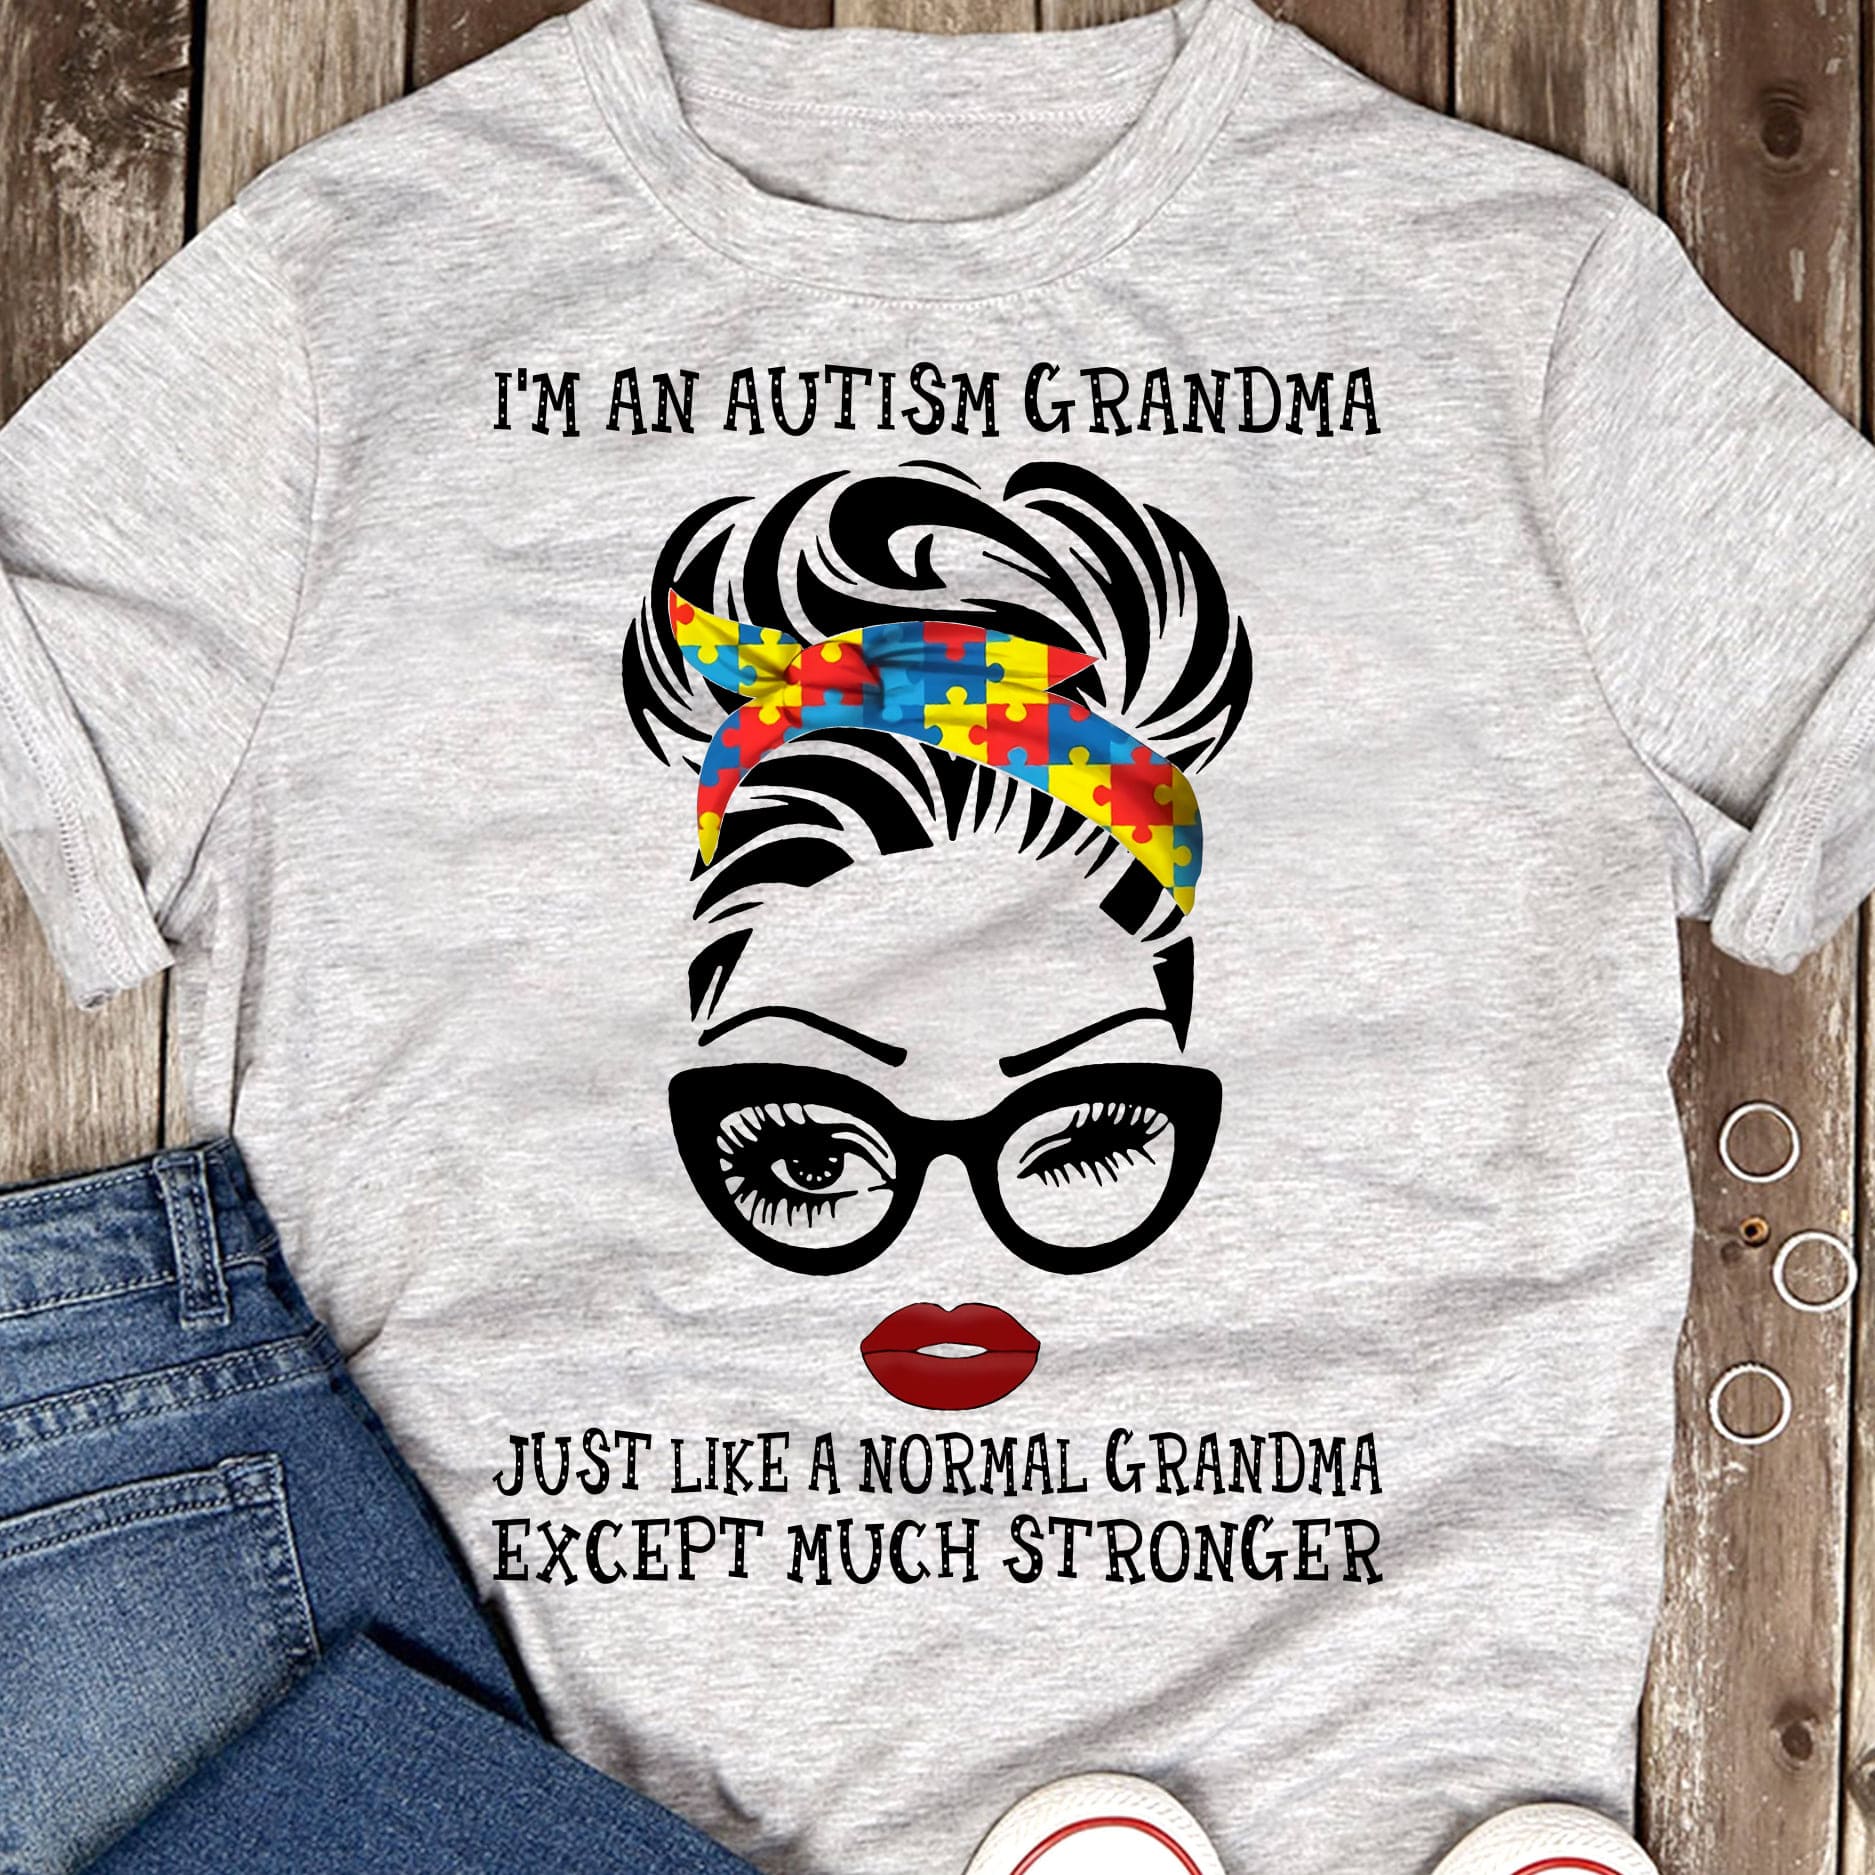 Autism Woman Face - I am an autism grandma just like a normal grandma except much stronger